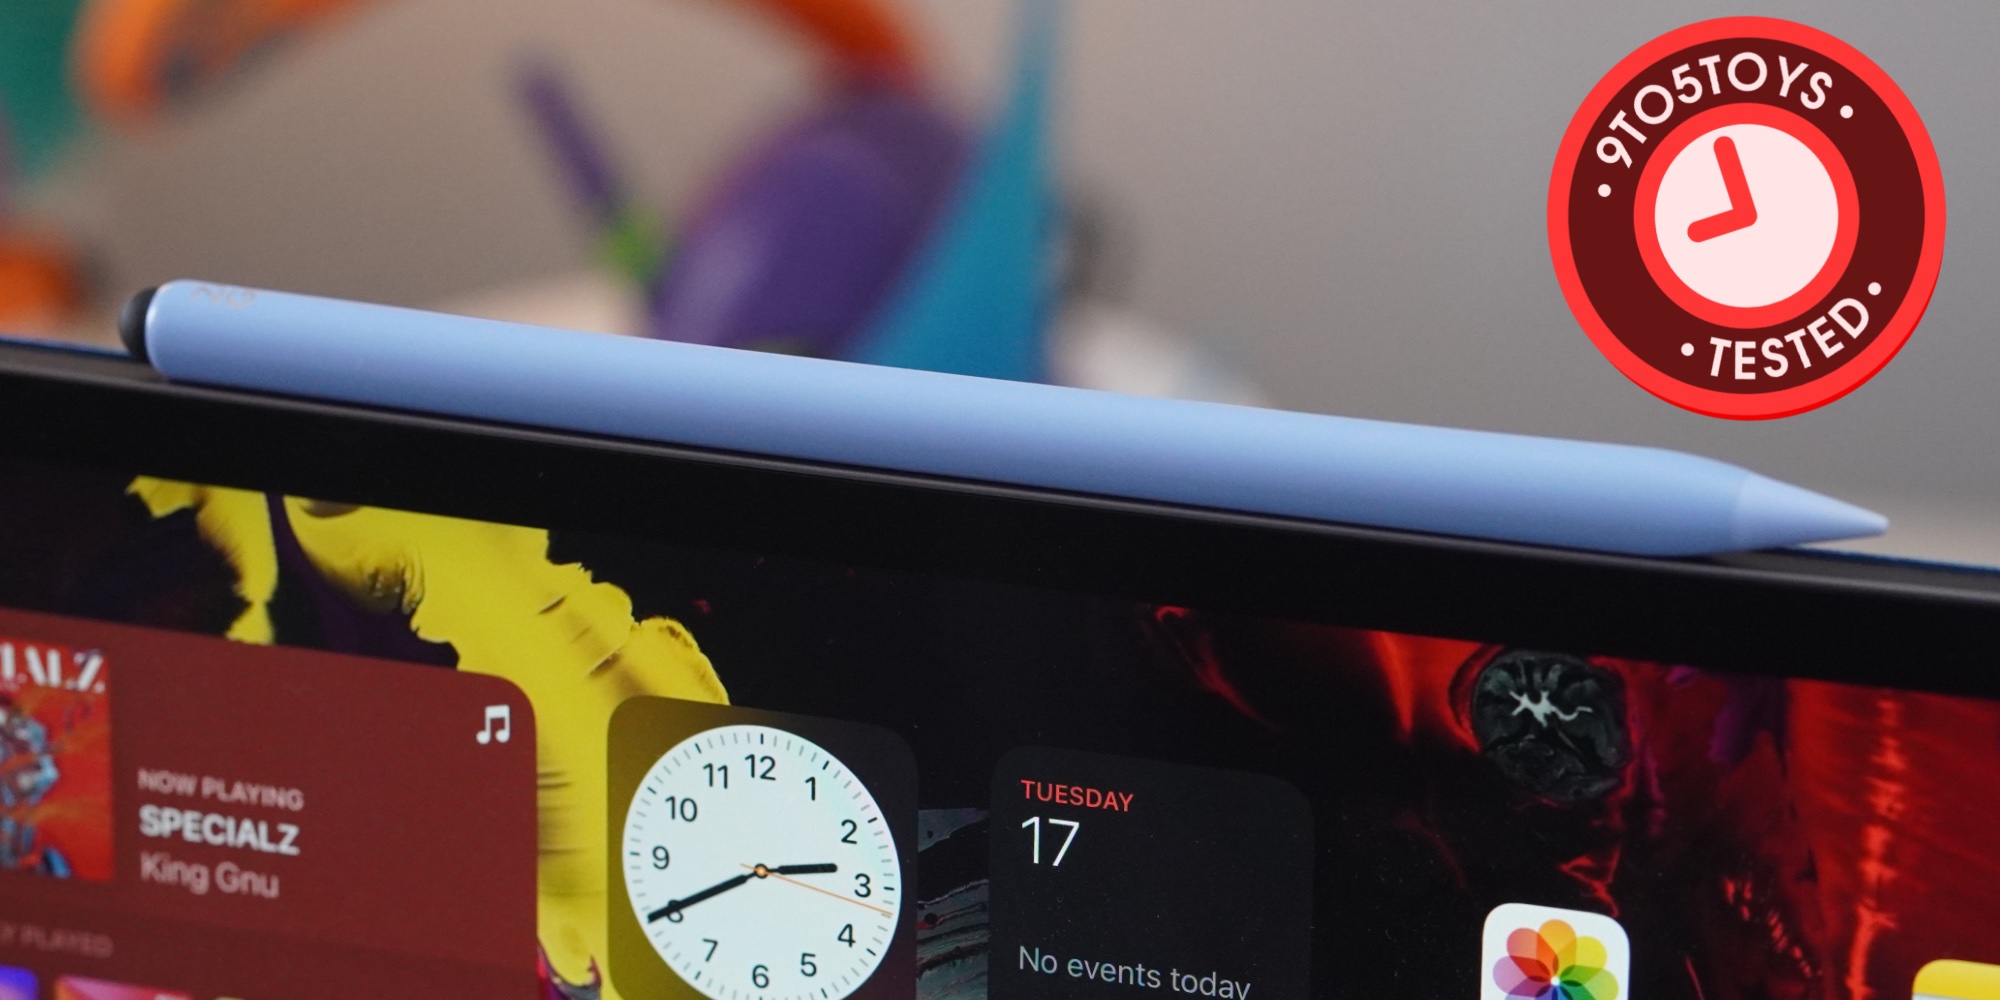 Is the Apple Pencil Really Worth Buying? [Updated 2023]